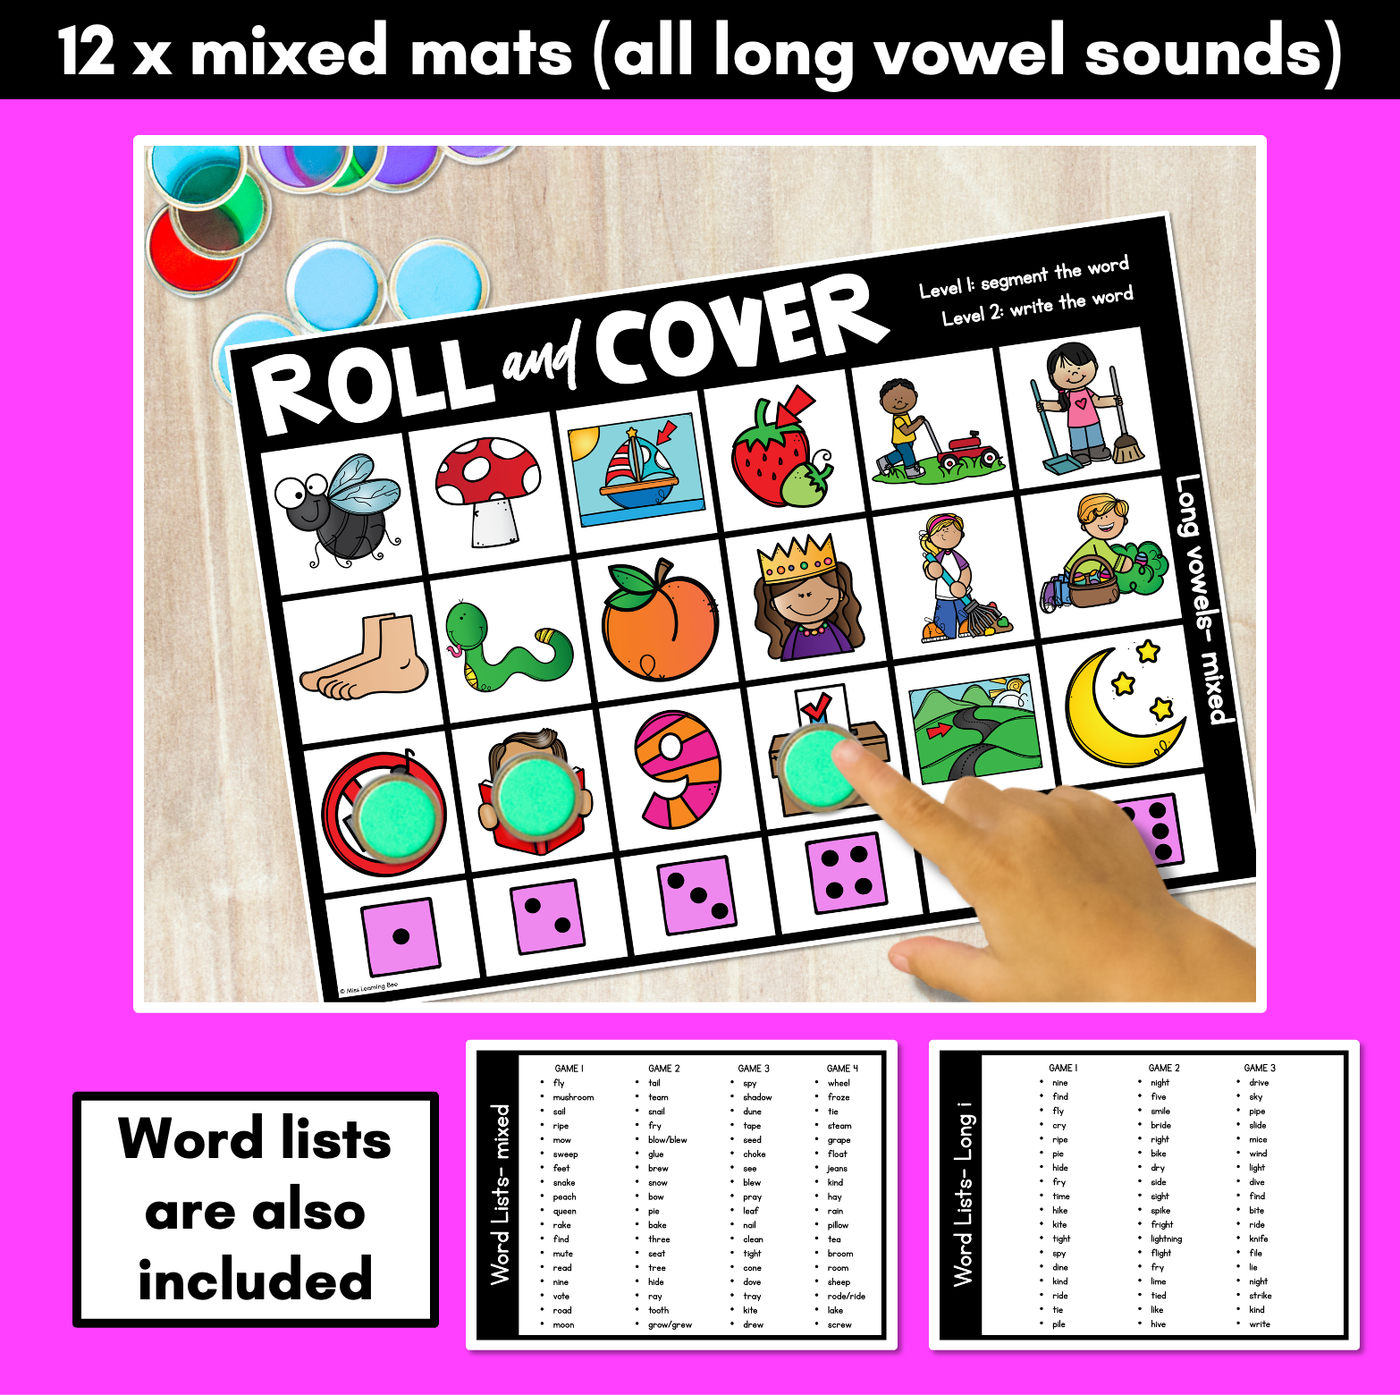 LONG VOWEL SOUND GAMES - No Prep Phonemic Awareness + Phonics Activity - Roll & Cover